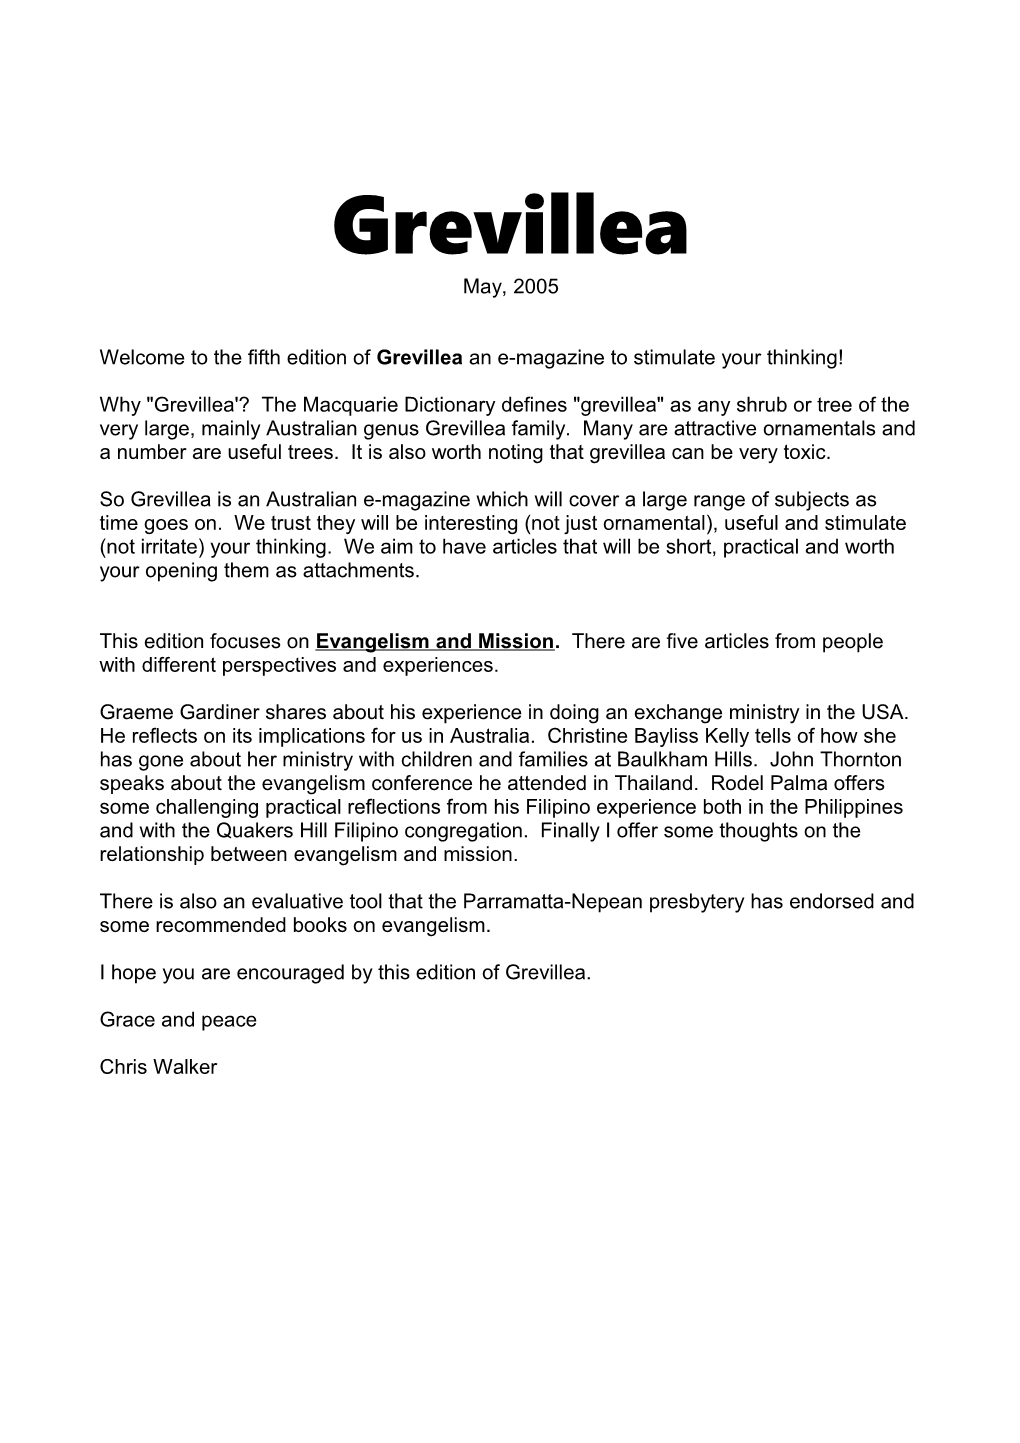 Welcome to the Fifth Edition of Grevillea an E-Magazine to Stimulate Your Thinking!